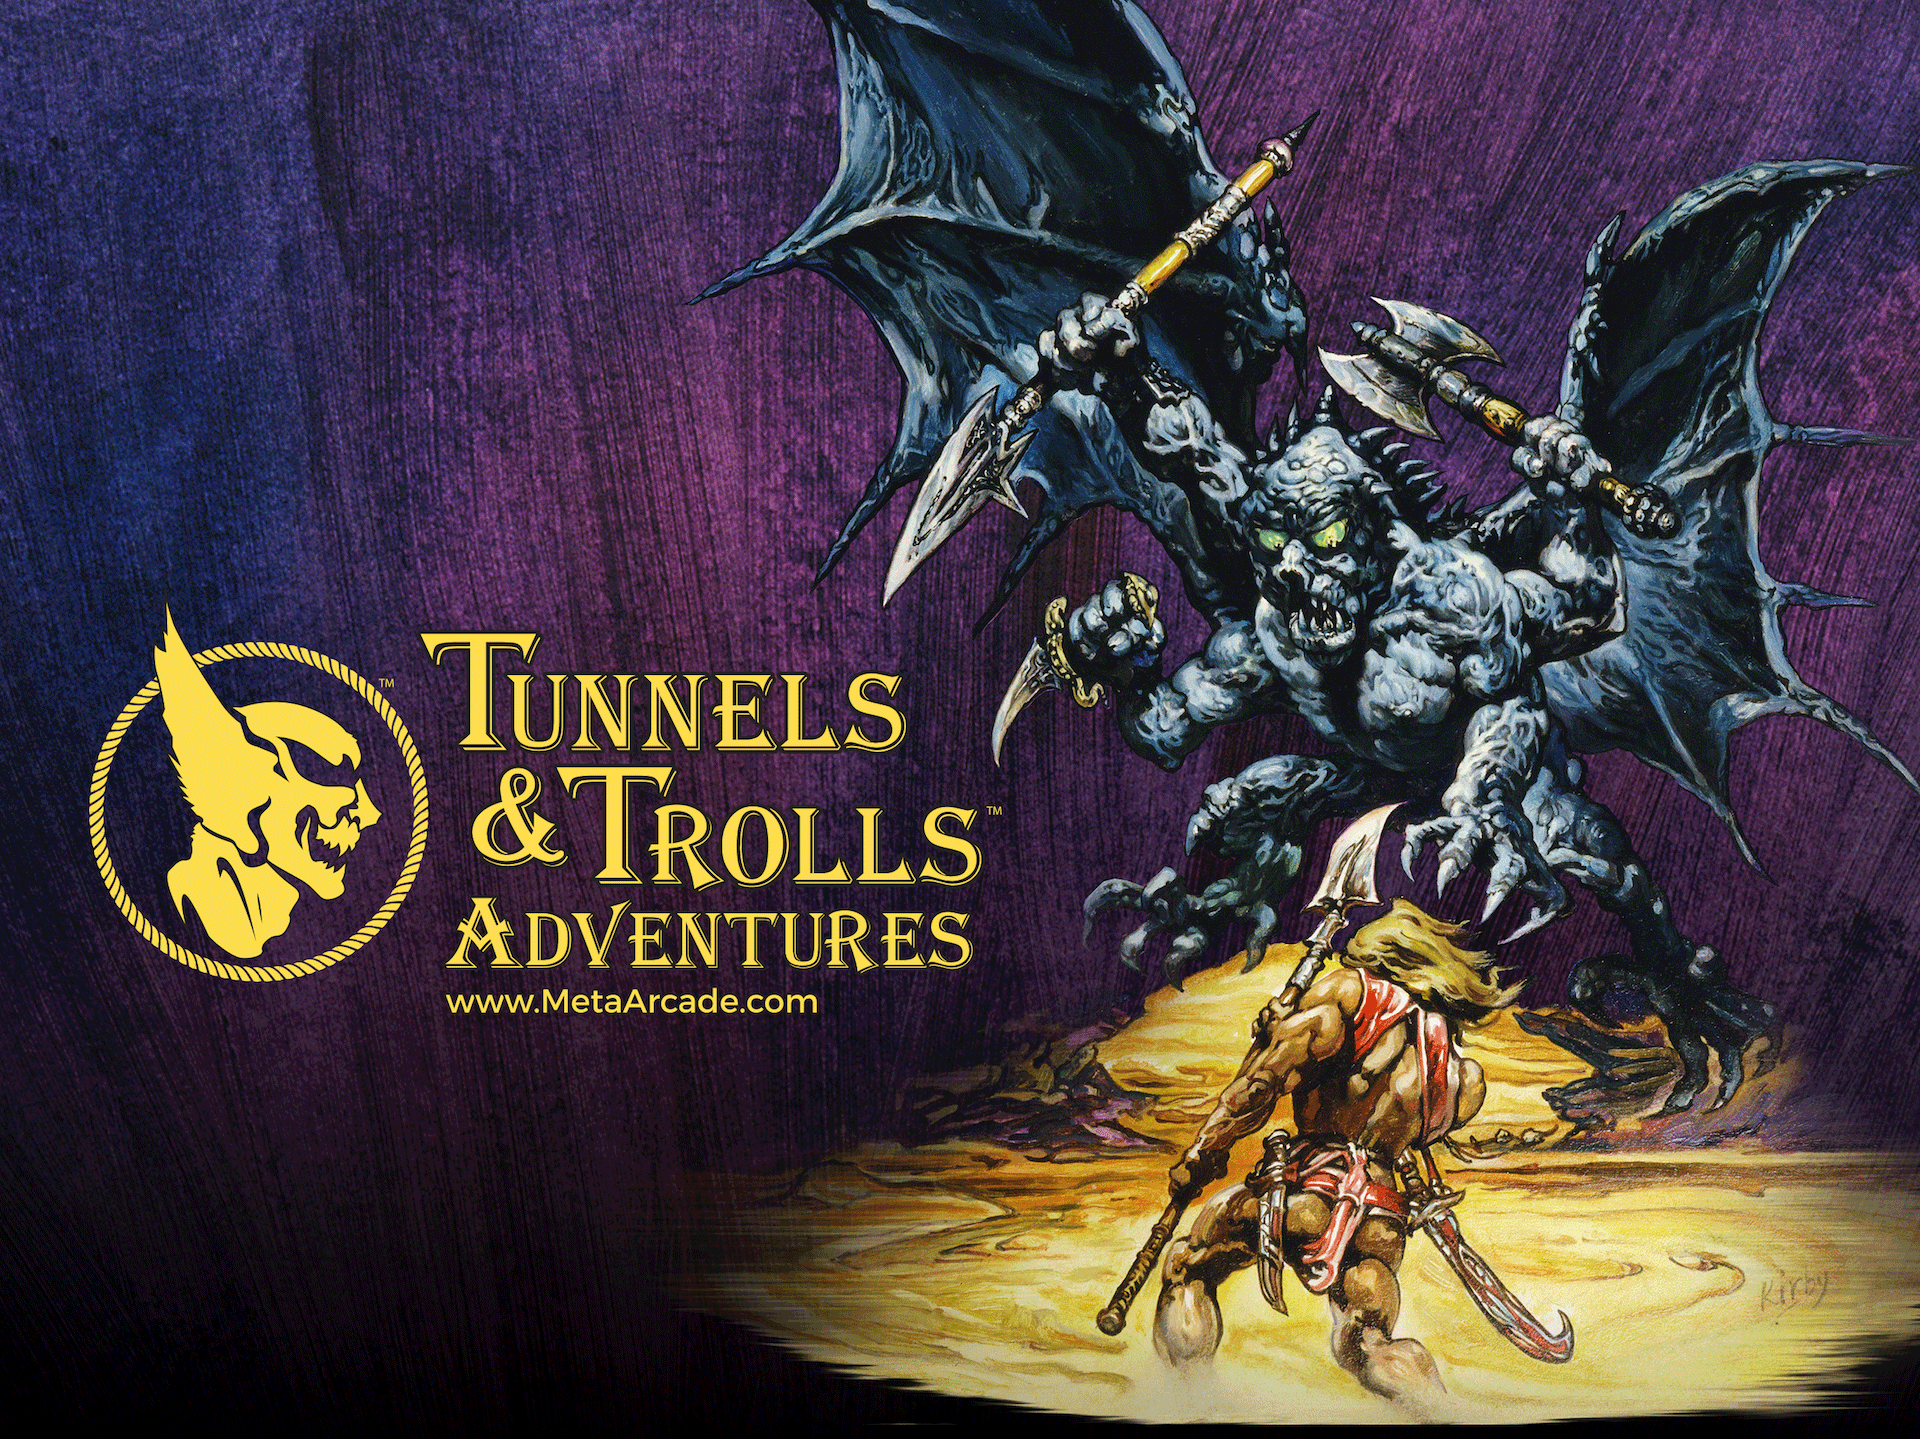 Tunnels and Trolls Adventures